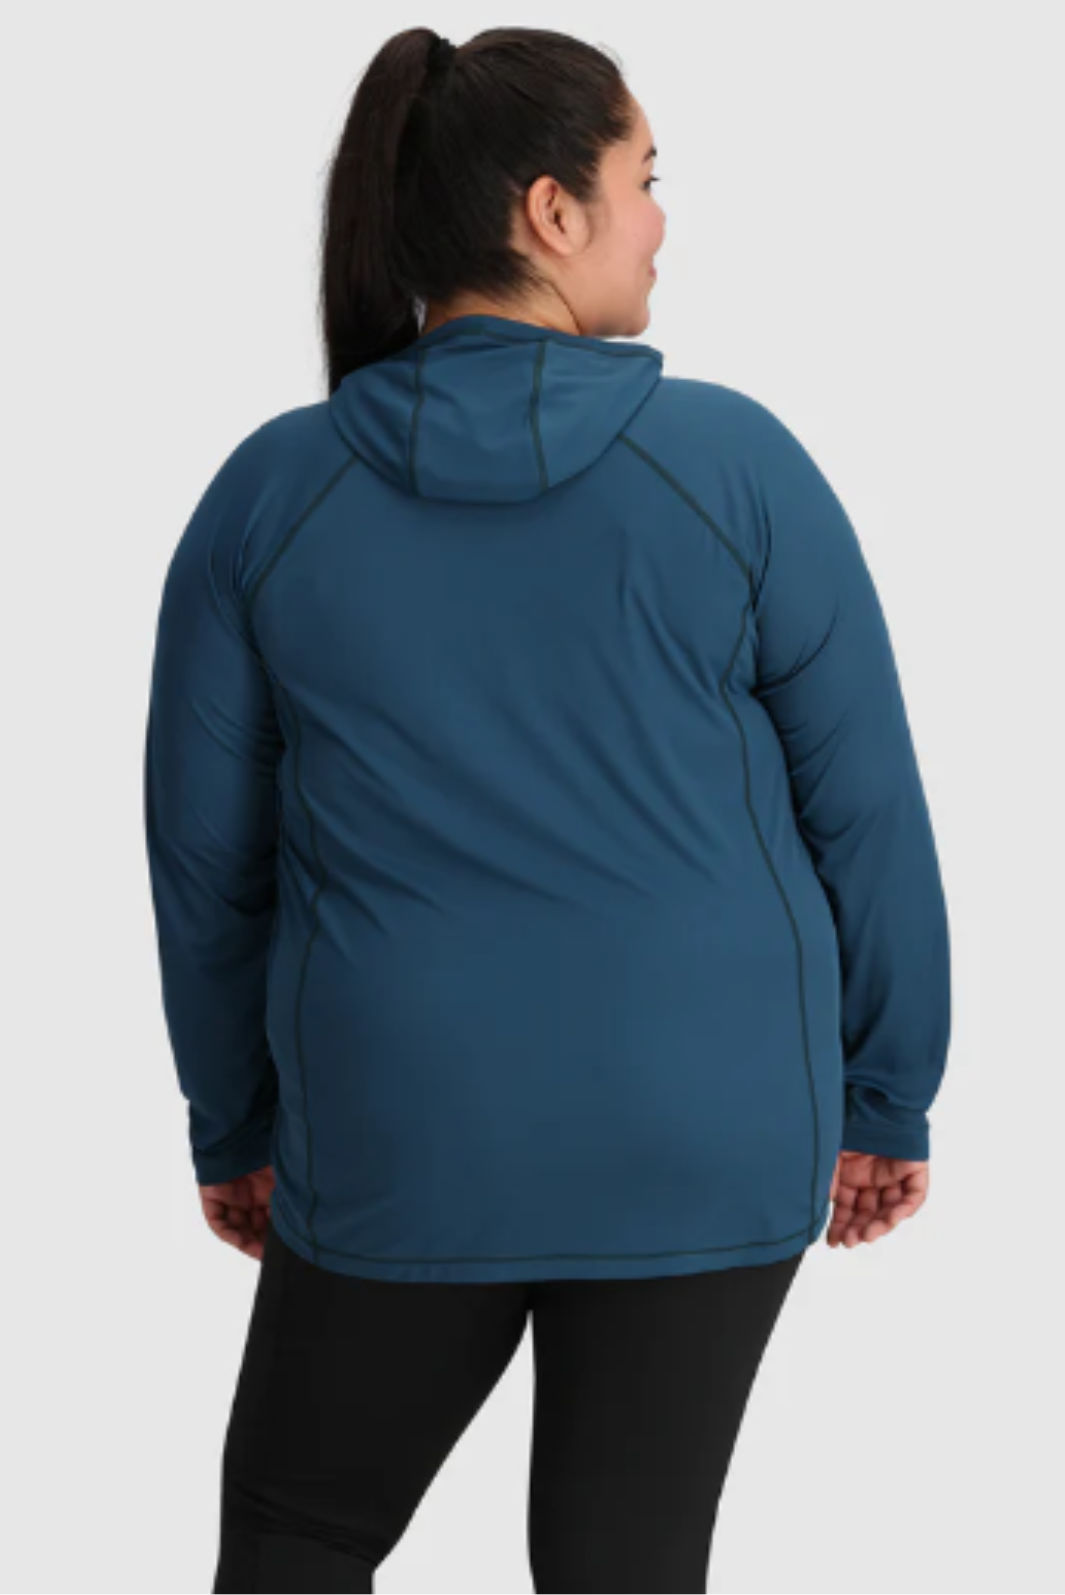 Hoodie Echo Taille Plus d'Outdoor Research